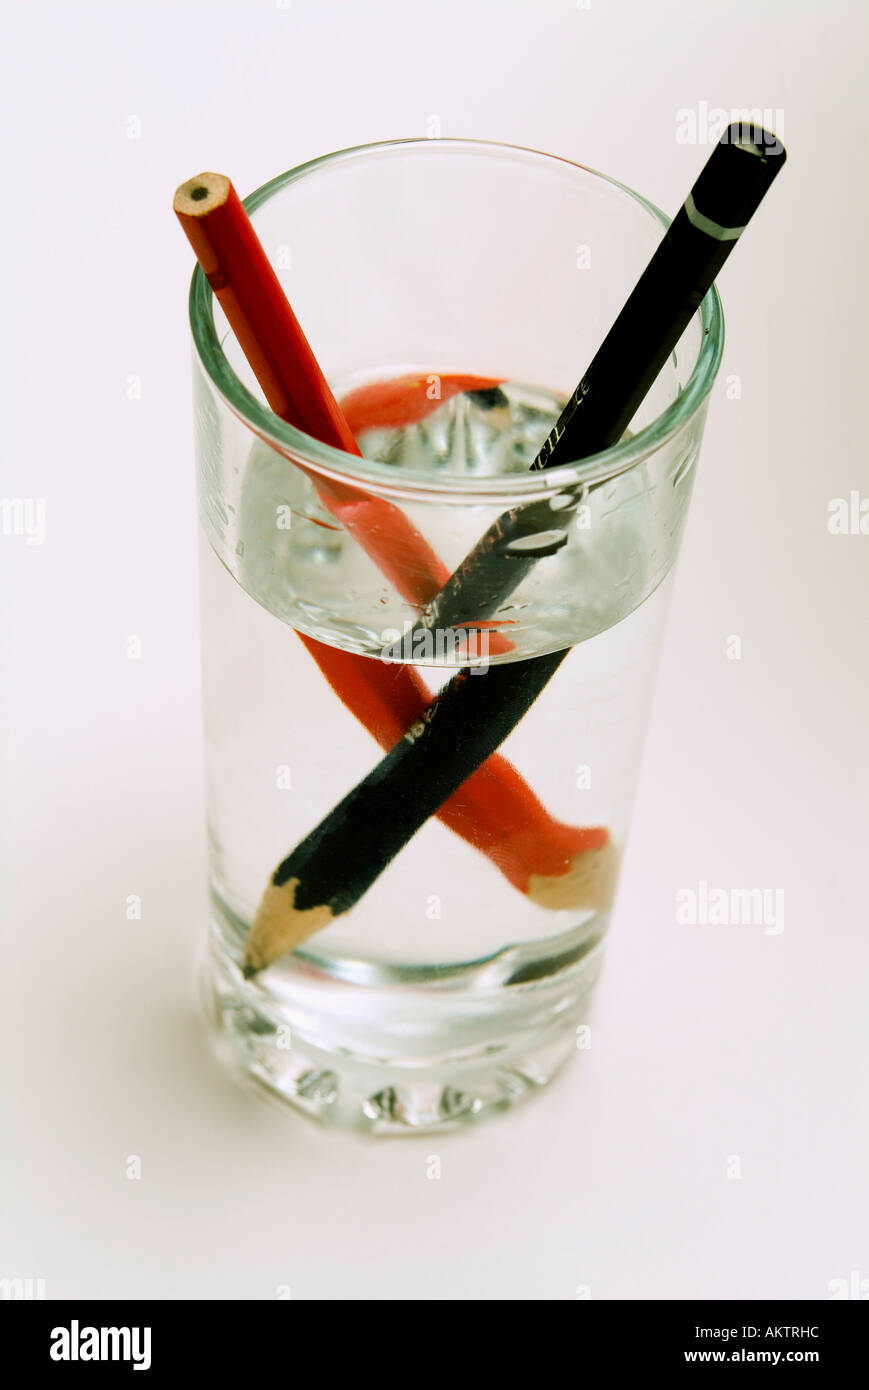 Two pencils in a glass of water showing the optical distoprtion caused by refraction of the image Stock Photo